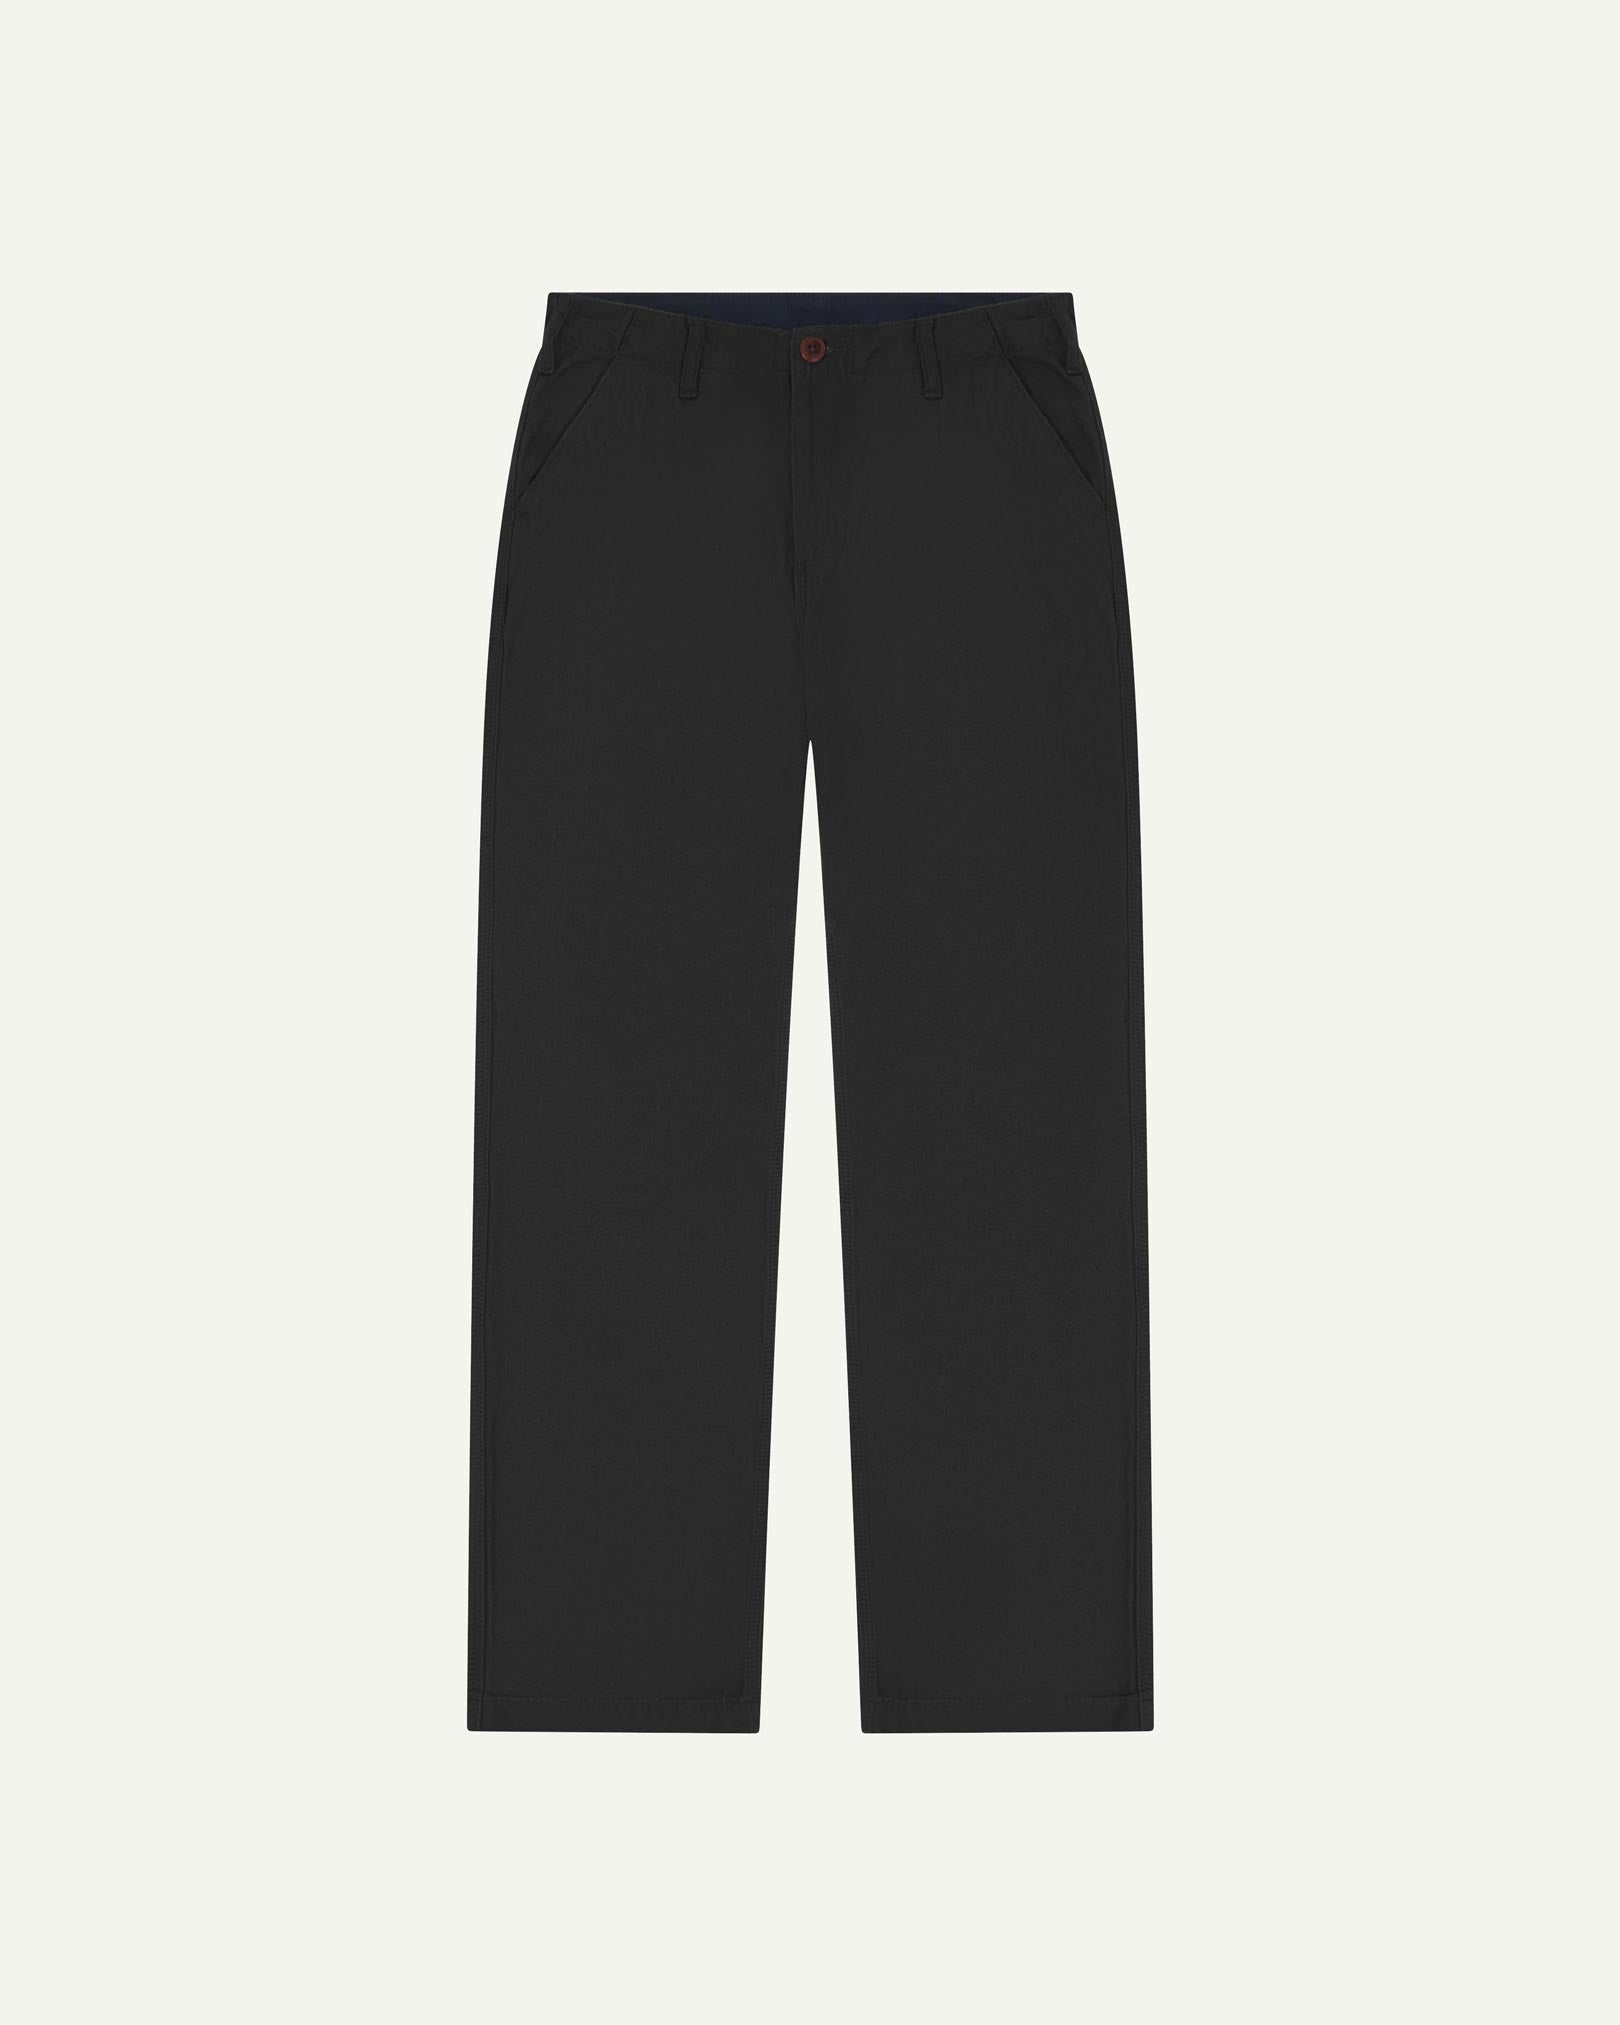 Front flat view of 5005 Uskees men's organic cotton black casual trousers with view of YKK zip fly and Corozo buttons.